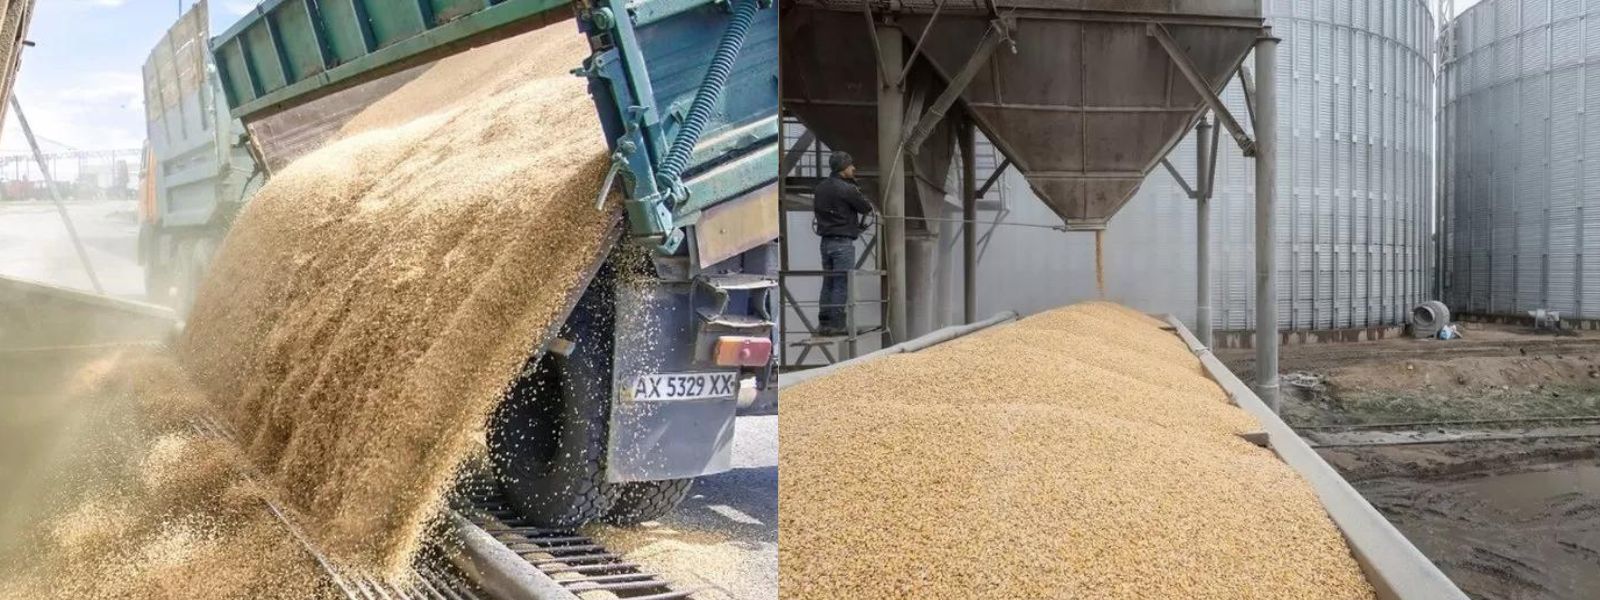 Ukraine grain deal: why is Russia pulling out?